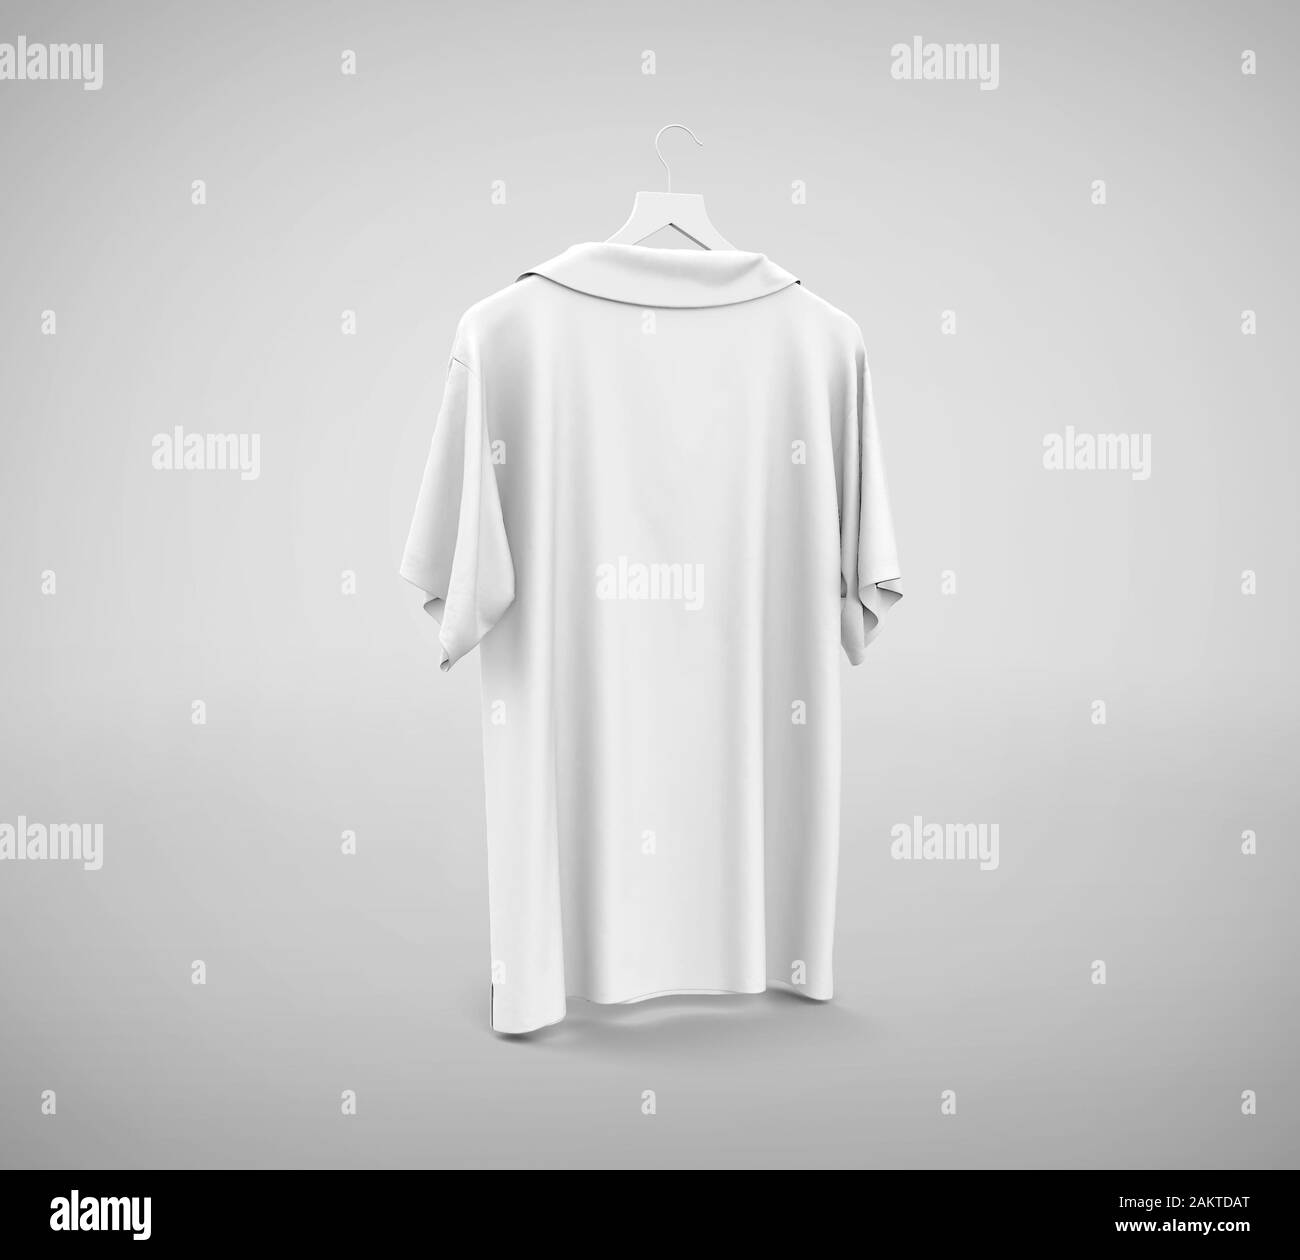 Download Blank White Polo Shirt Mockup Clear Male White Polo Shirt Mockup 3d Rendering Isolated On Light Background Short Sleeves Cotton Dress With Collar Stock Photo Alamy